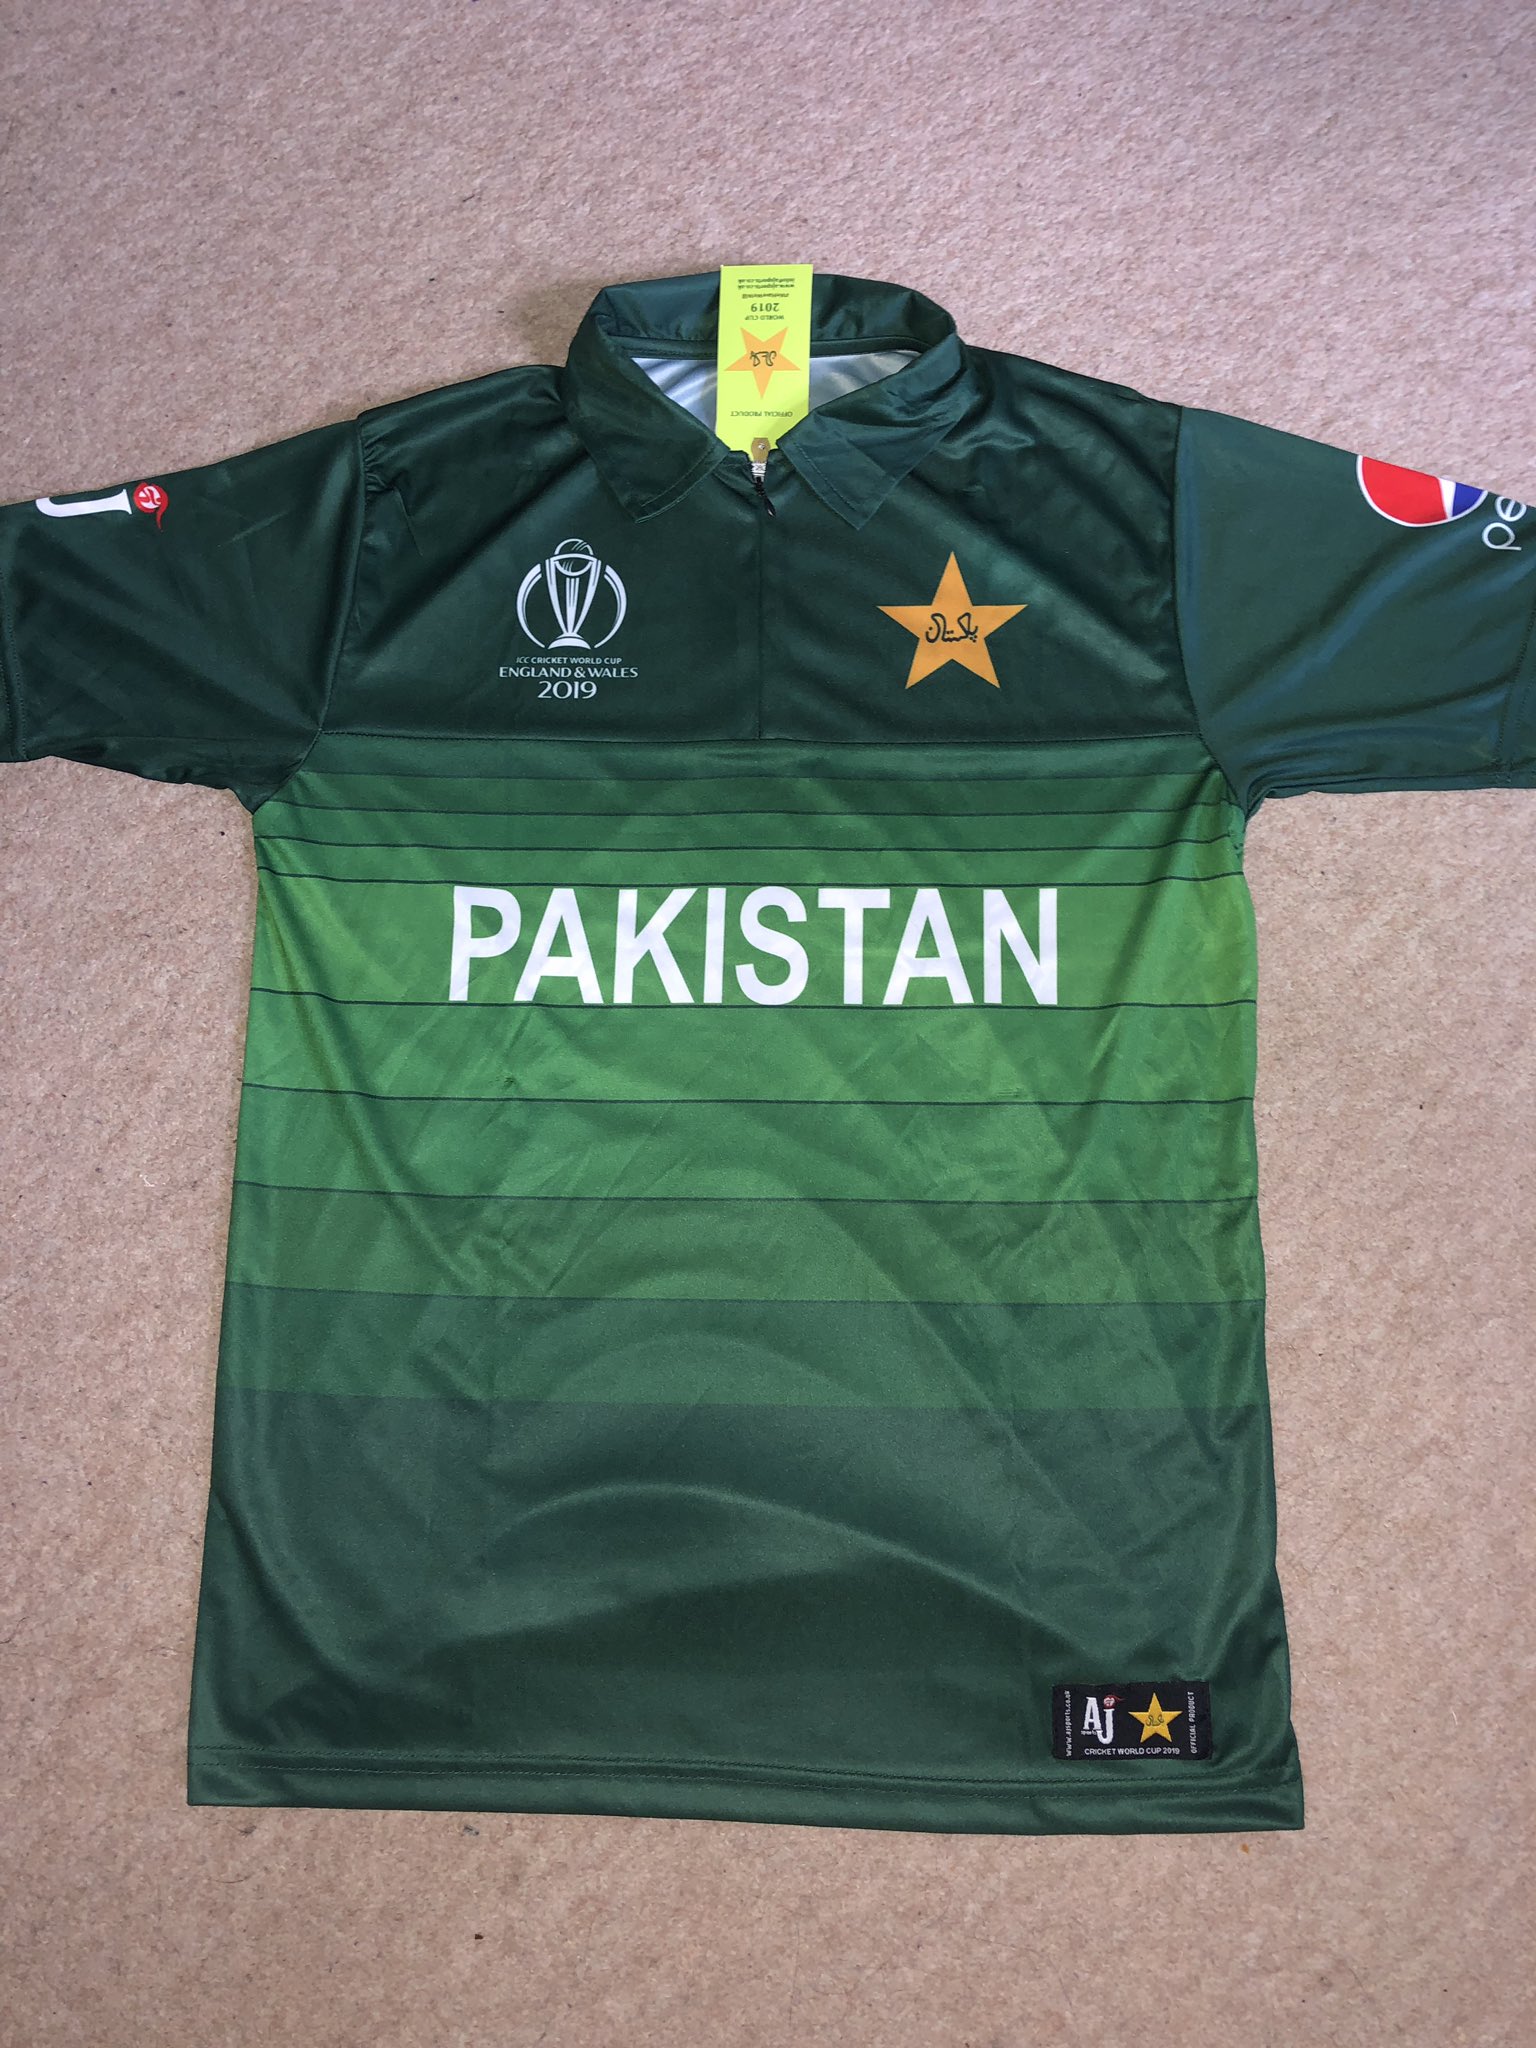 AJ LOGO PAKISTAN CRICKET WORLD CUP 2019 jersey t-shirt PERSONALISED all sizes 